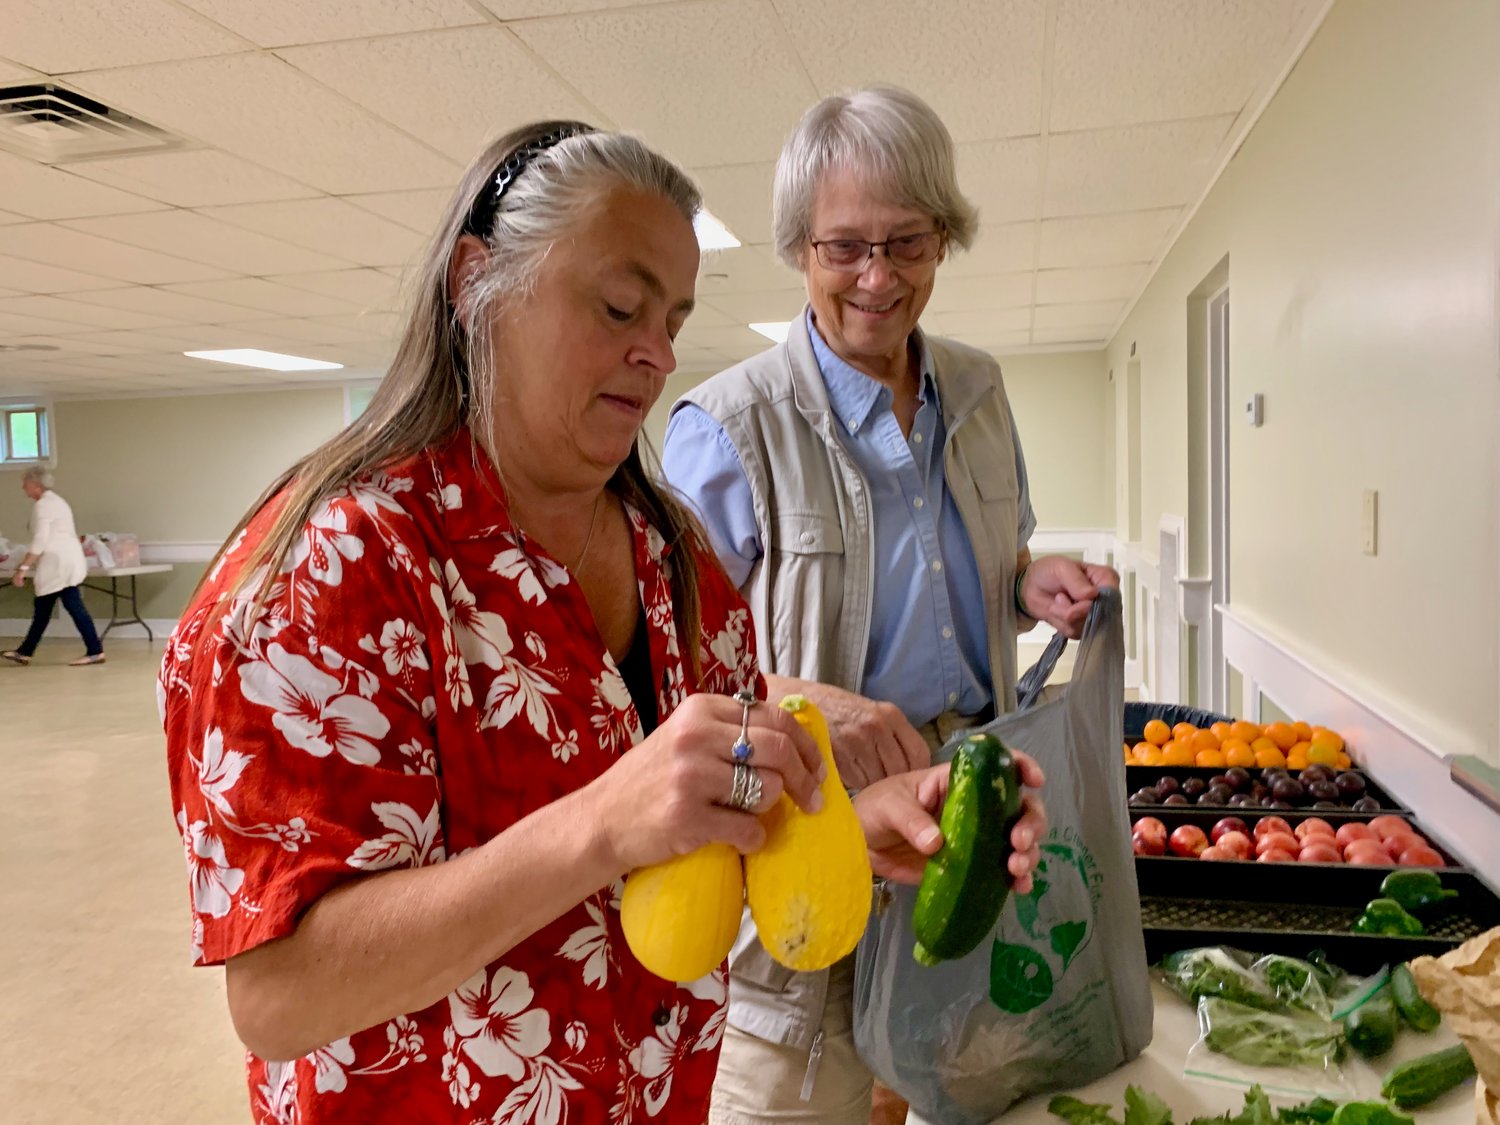 Mary Anne Crittenden (left), director of the St. John Lodge Food Pantry on Sprague Street, along with volunteer Peggy Matteson, bag fresh produce donated by a local resident Wednesday morning. They remind farmers and other residents that the pantry gladly accepts any surplus fresh produce. The food bank feeds about 45 to 50 families every week.